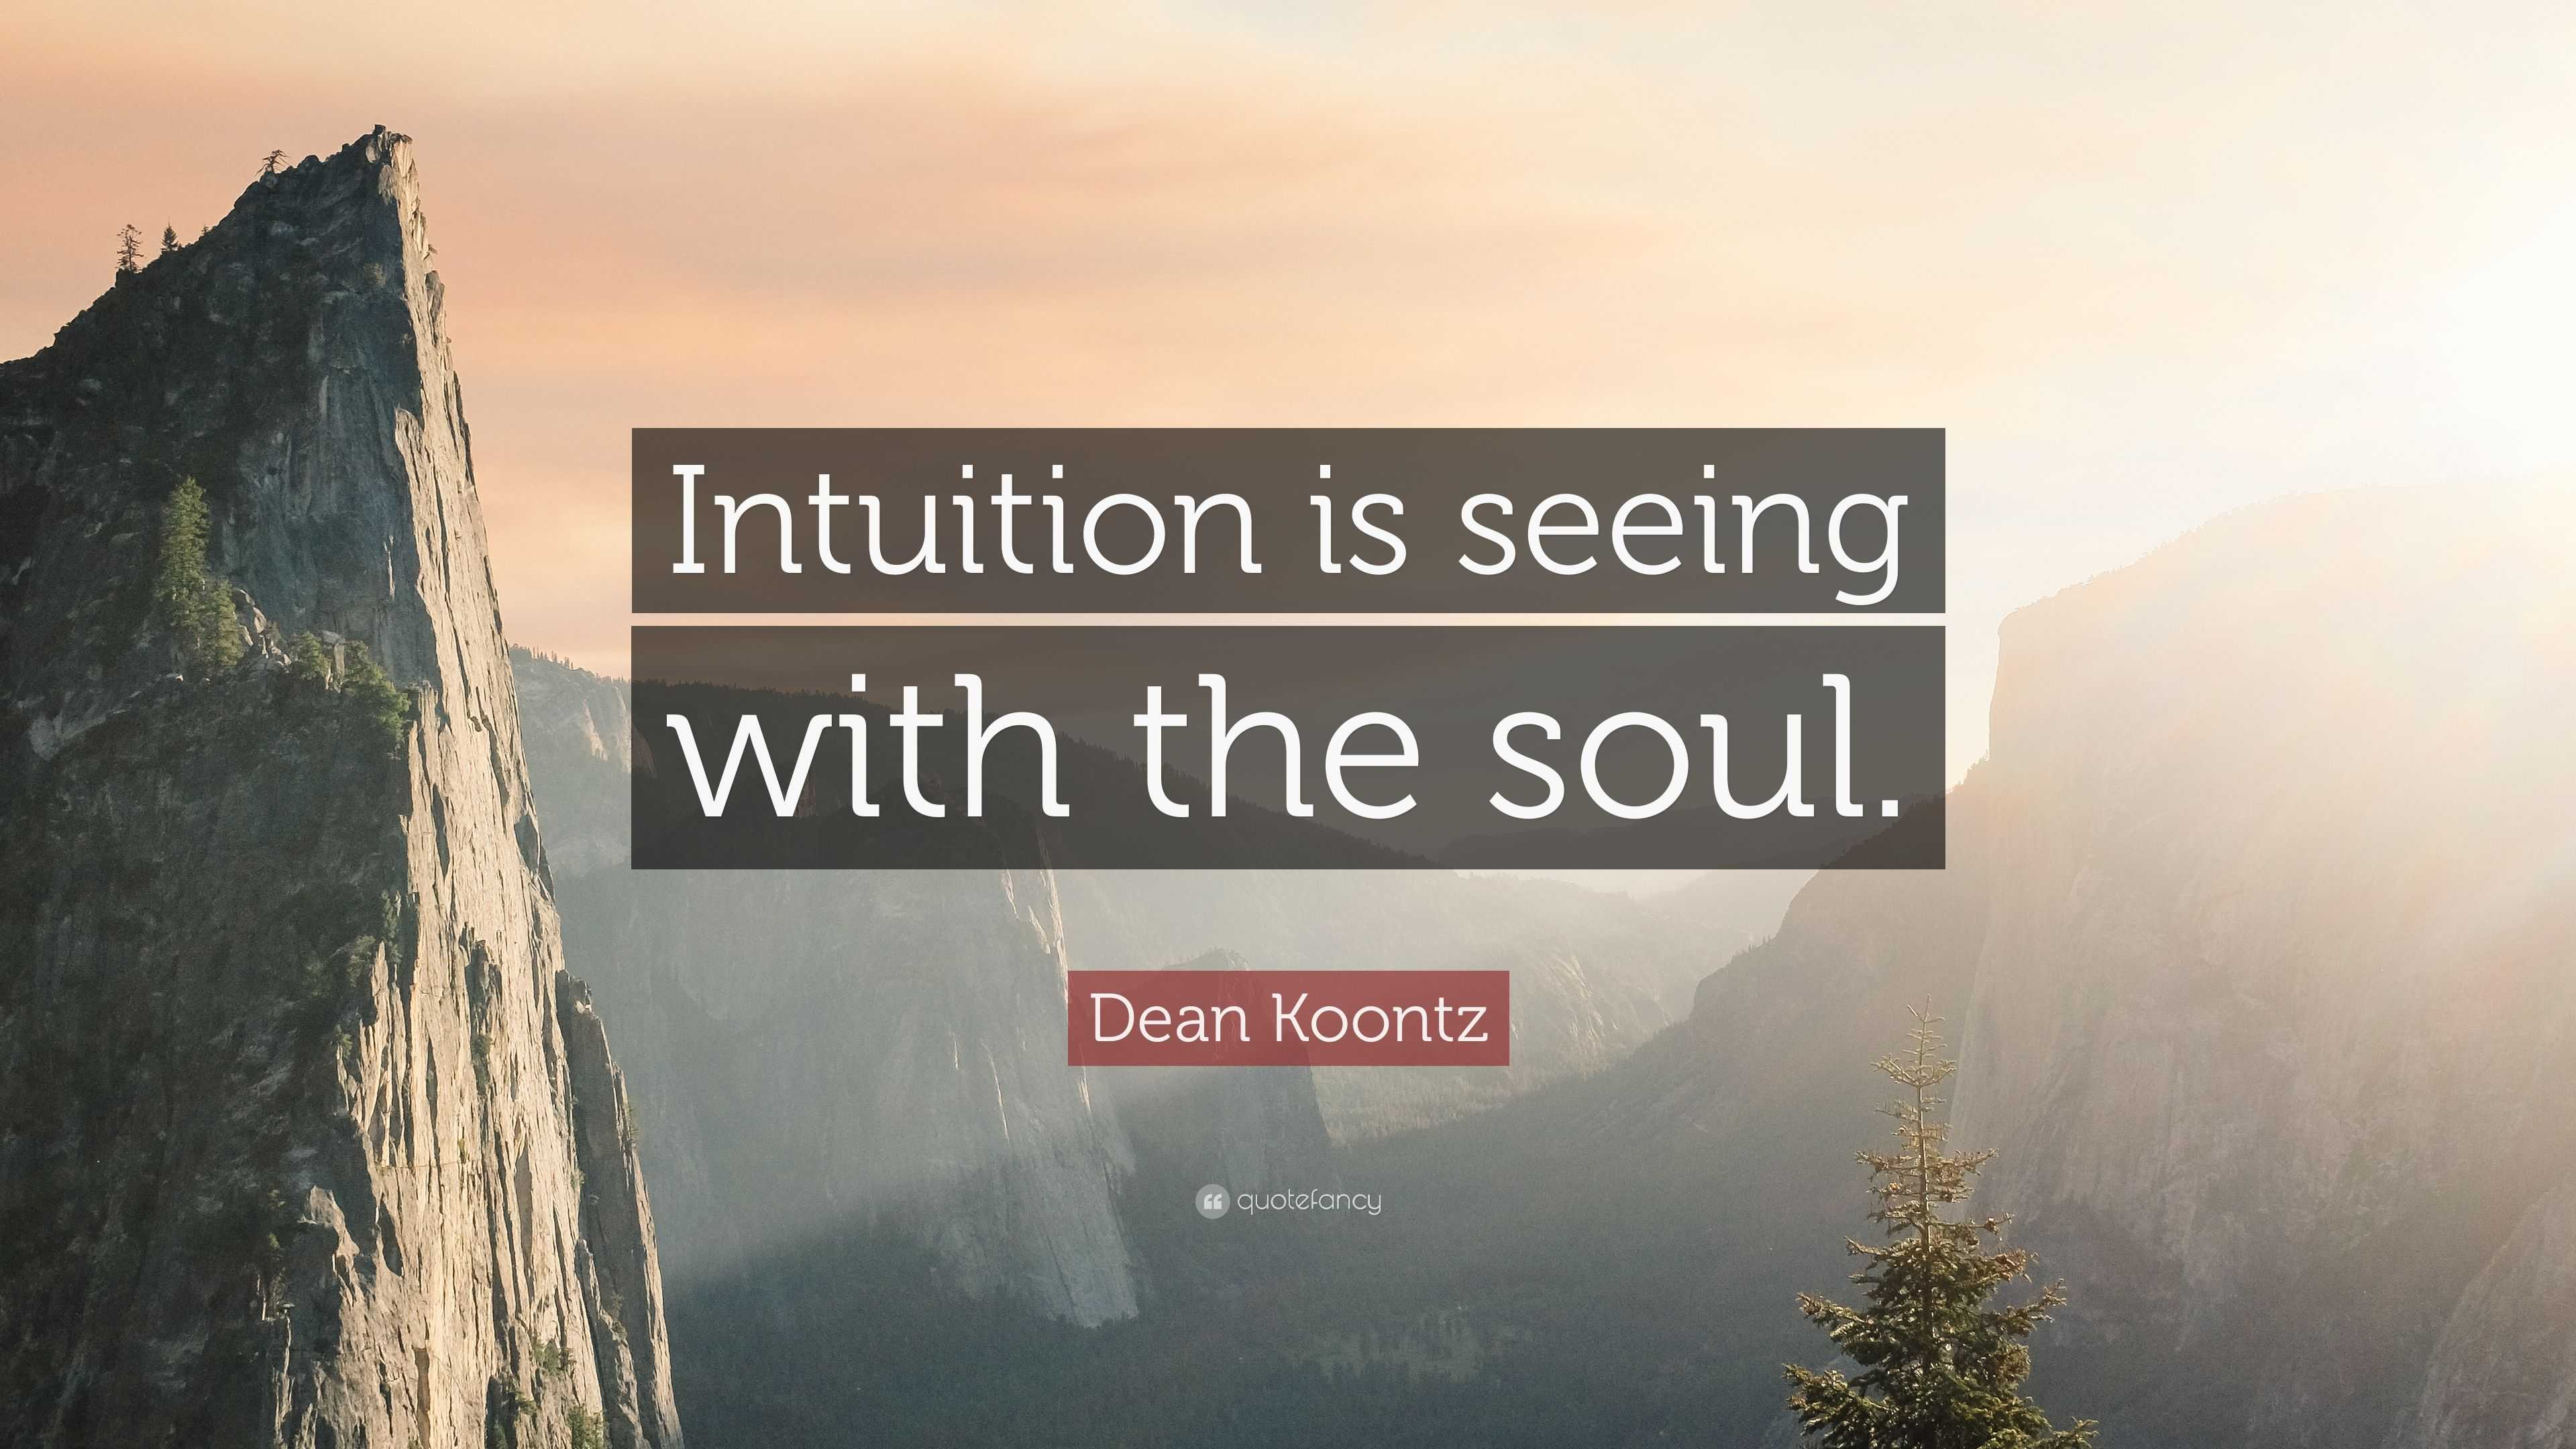 Dean Koontz Quote: “Intuition is seeing with the soul.” (8 wallpapers